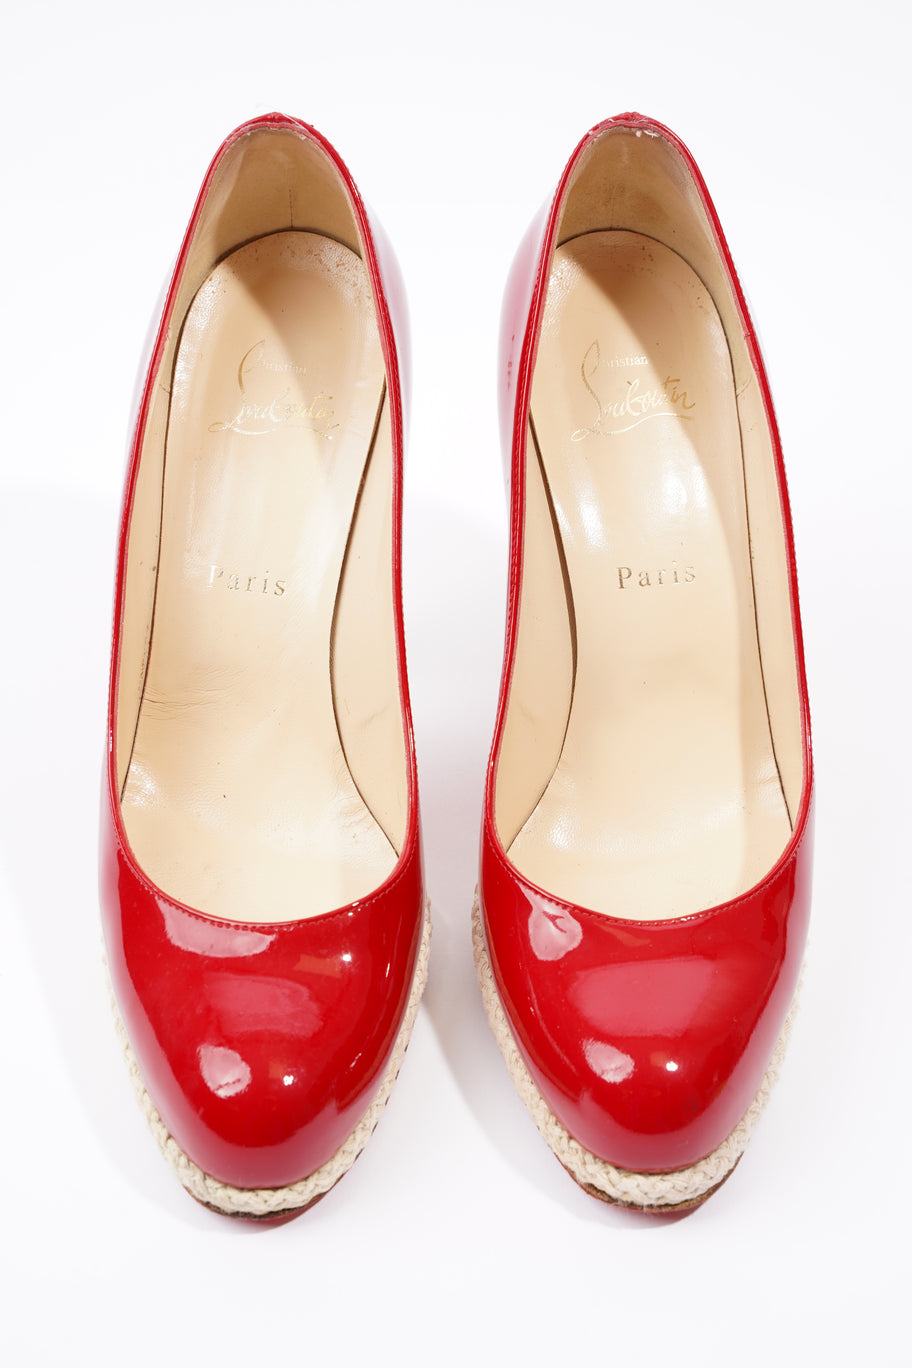 New Simple Pump 120 Red Patent Leather EU 39 UK 6 Image 8